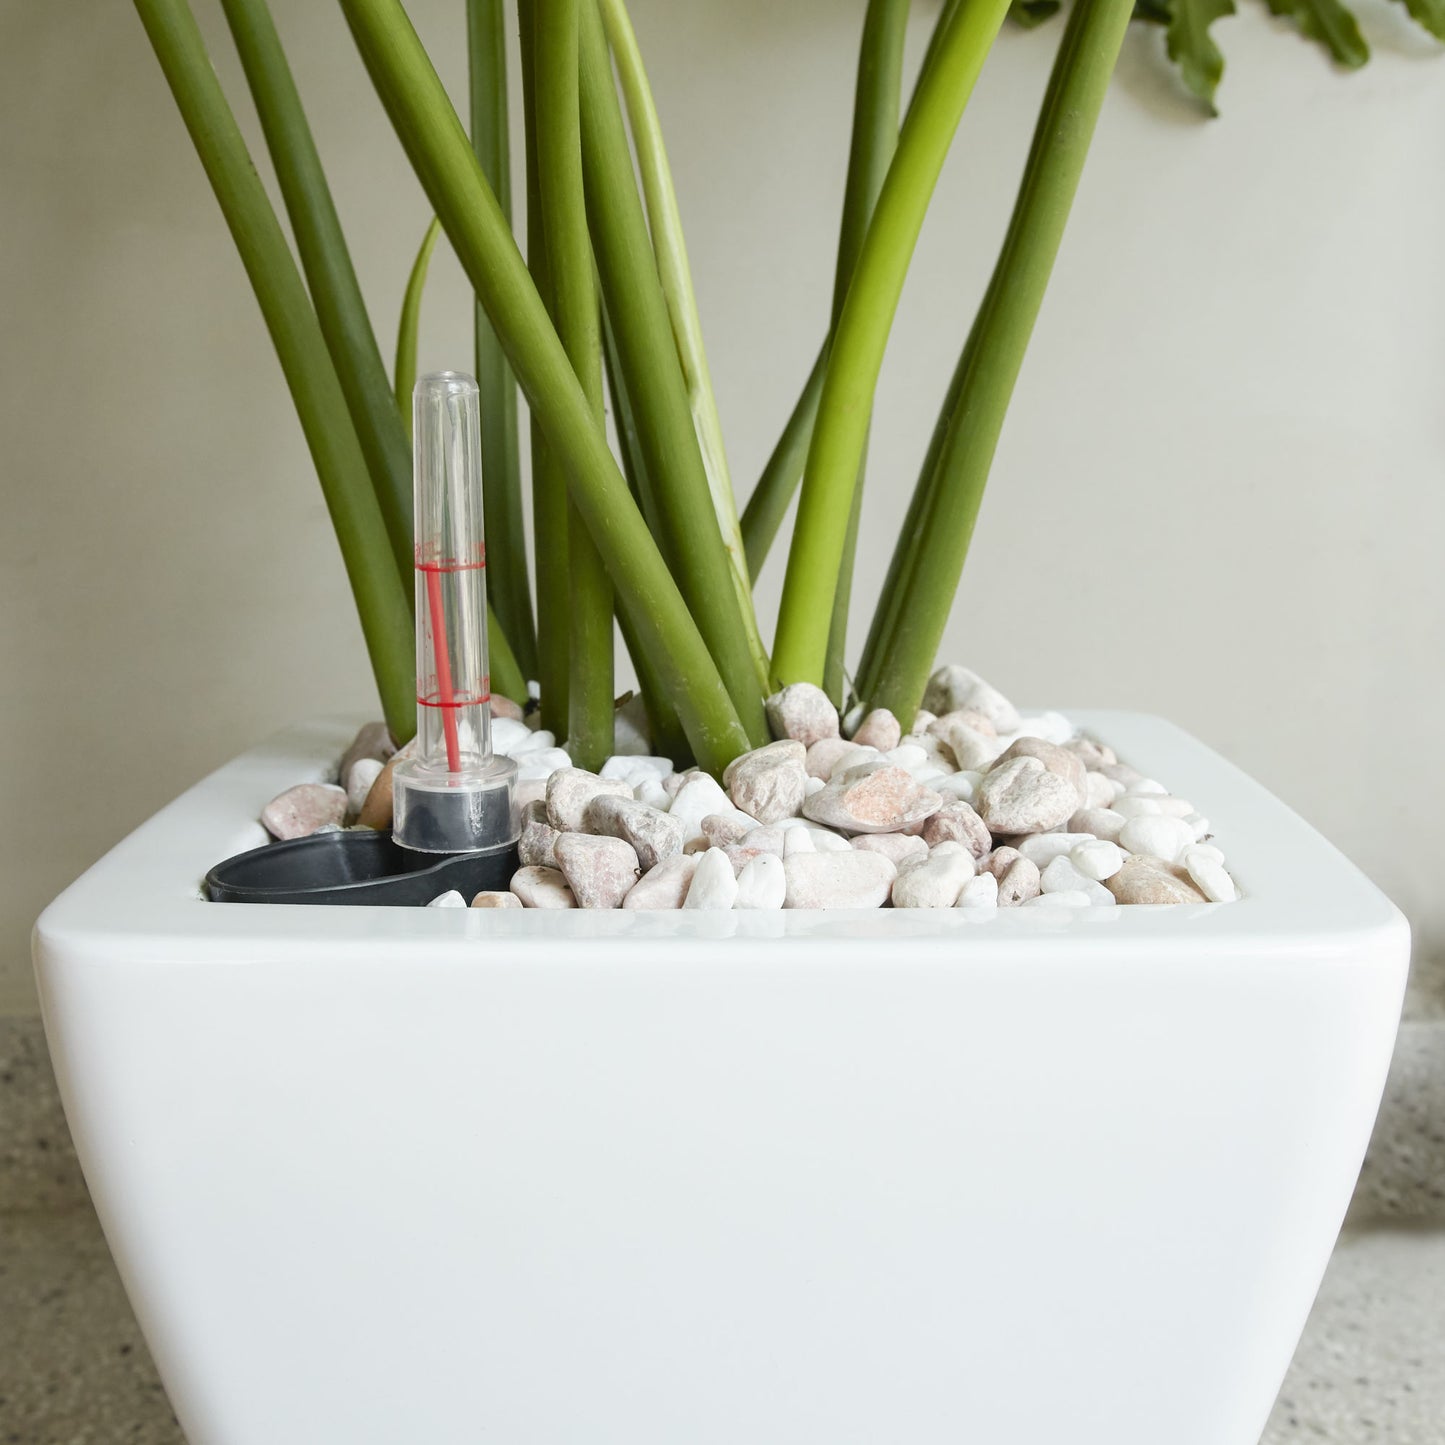 2-Pack Smart Self-watering Planter Pot for Indoor and Outdoor - White - Square Cone